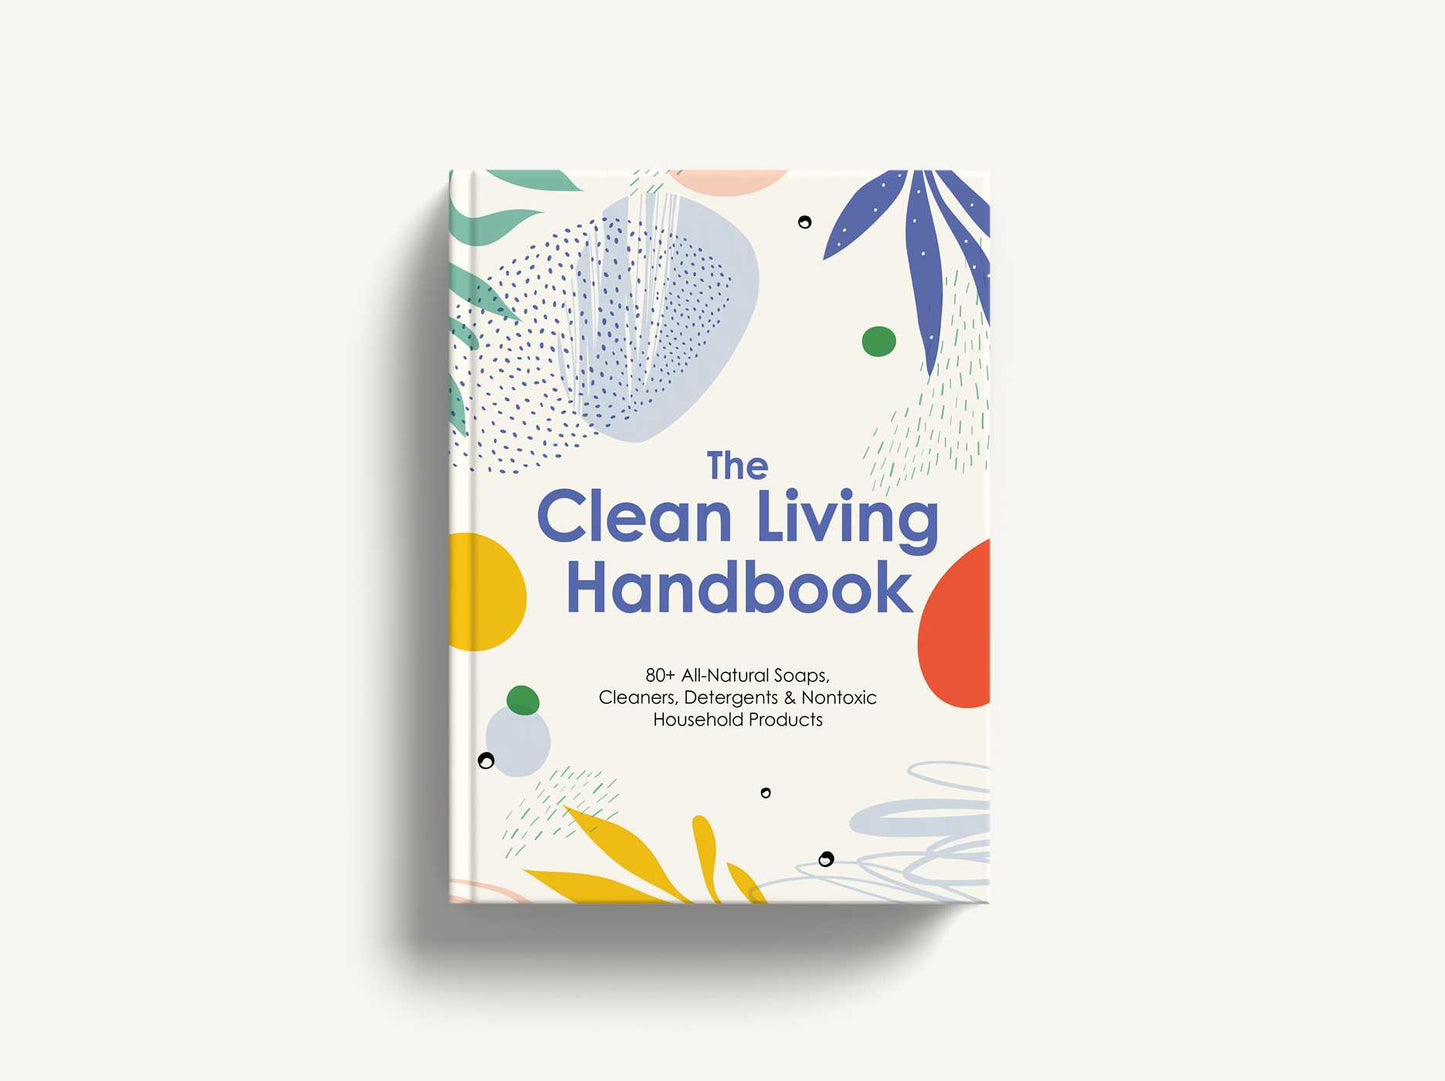 The Clean Living Handbook: 80+ All-Natural Soaps, Cleaners, Detergents & Nontoxic Household Products